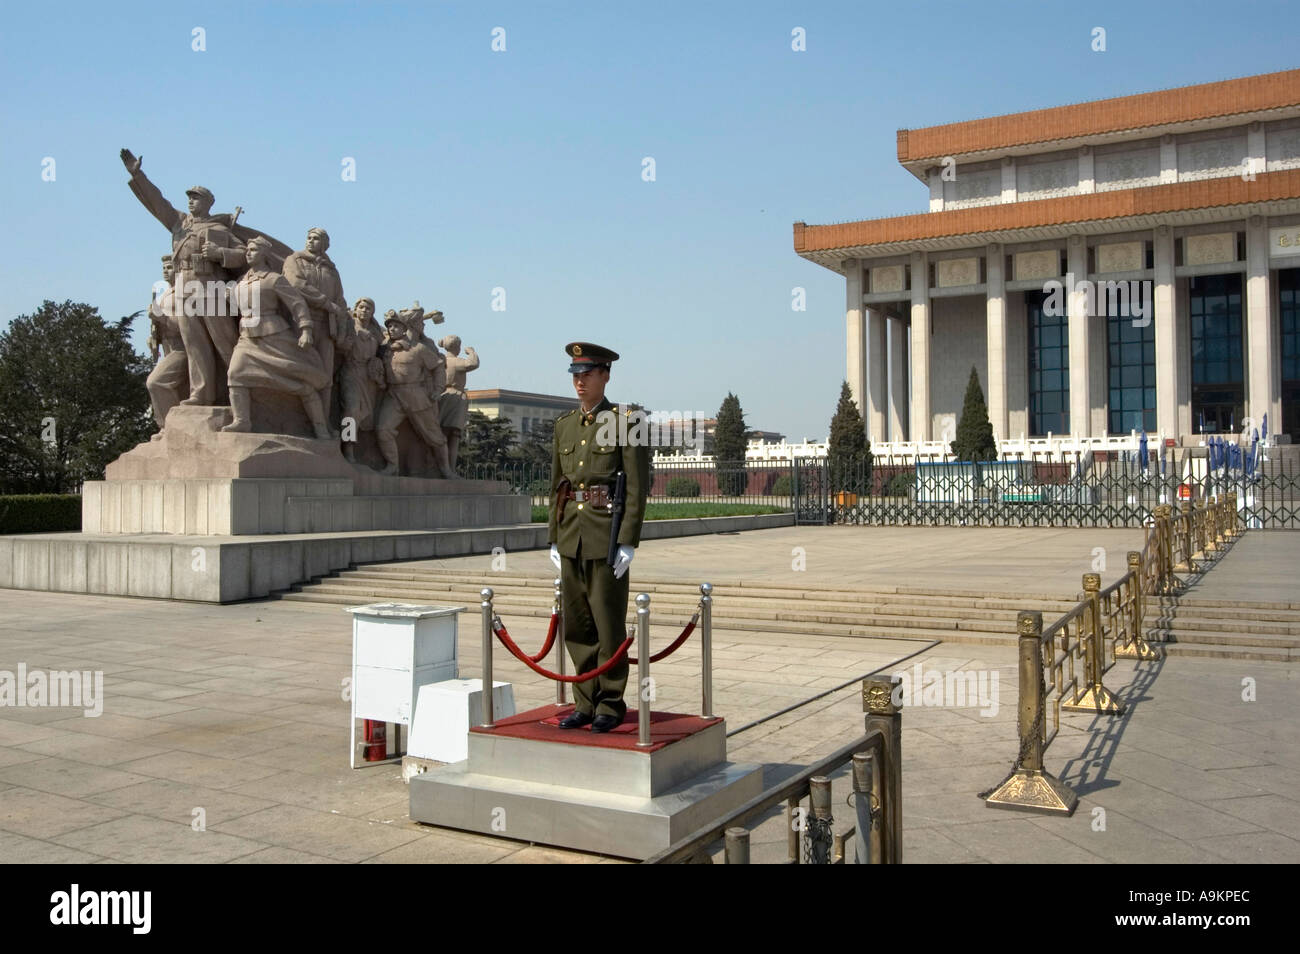 PEOPLES LIBERATION ARMY SOLDIER IN FRONT OF THE CHAIRMAN MAO MAUSOLEUM TIANANMEN SQUARE BEIJING CHINA Stock Photo